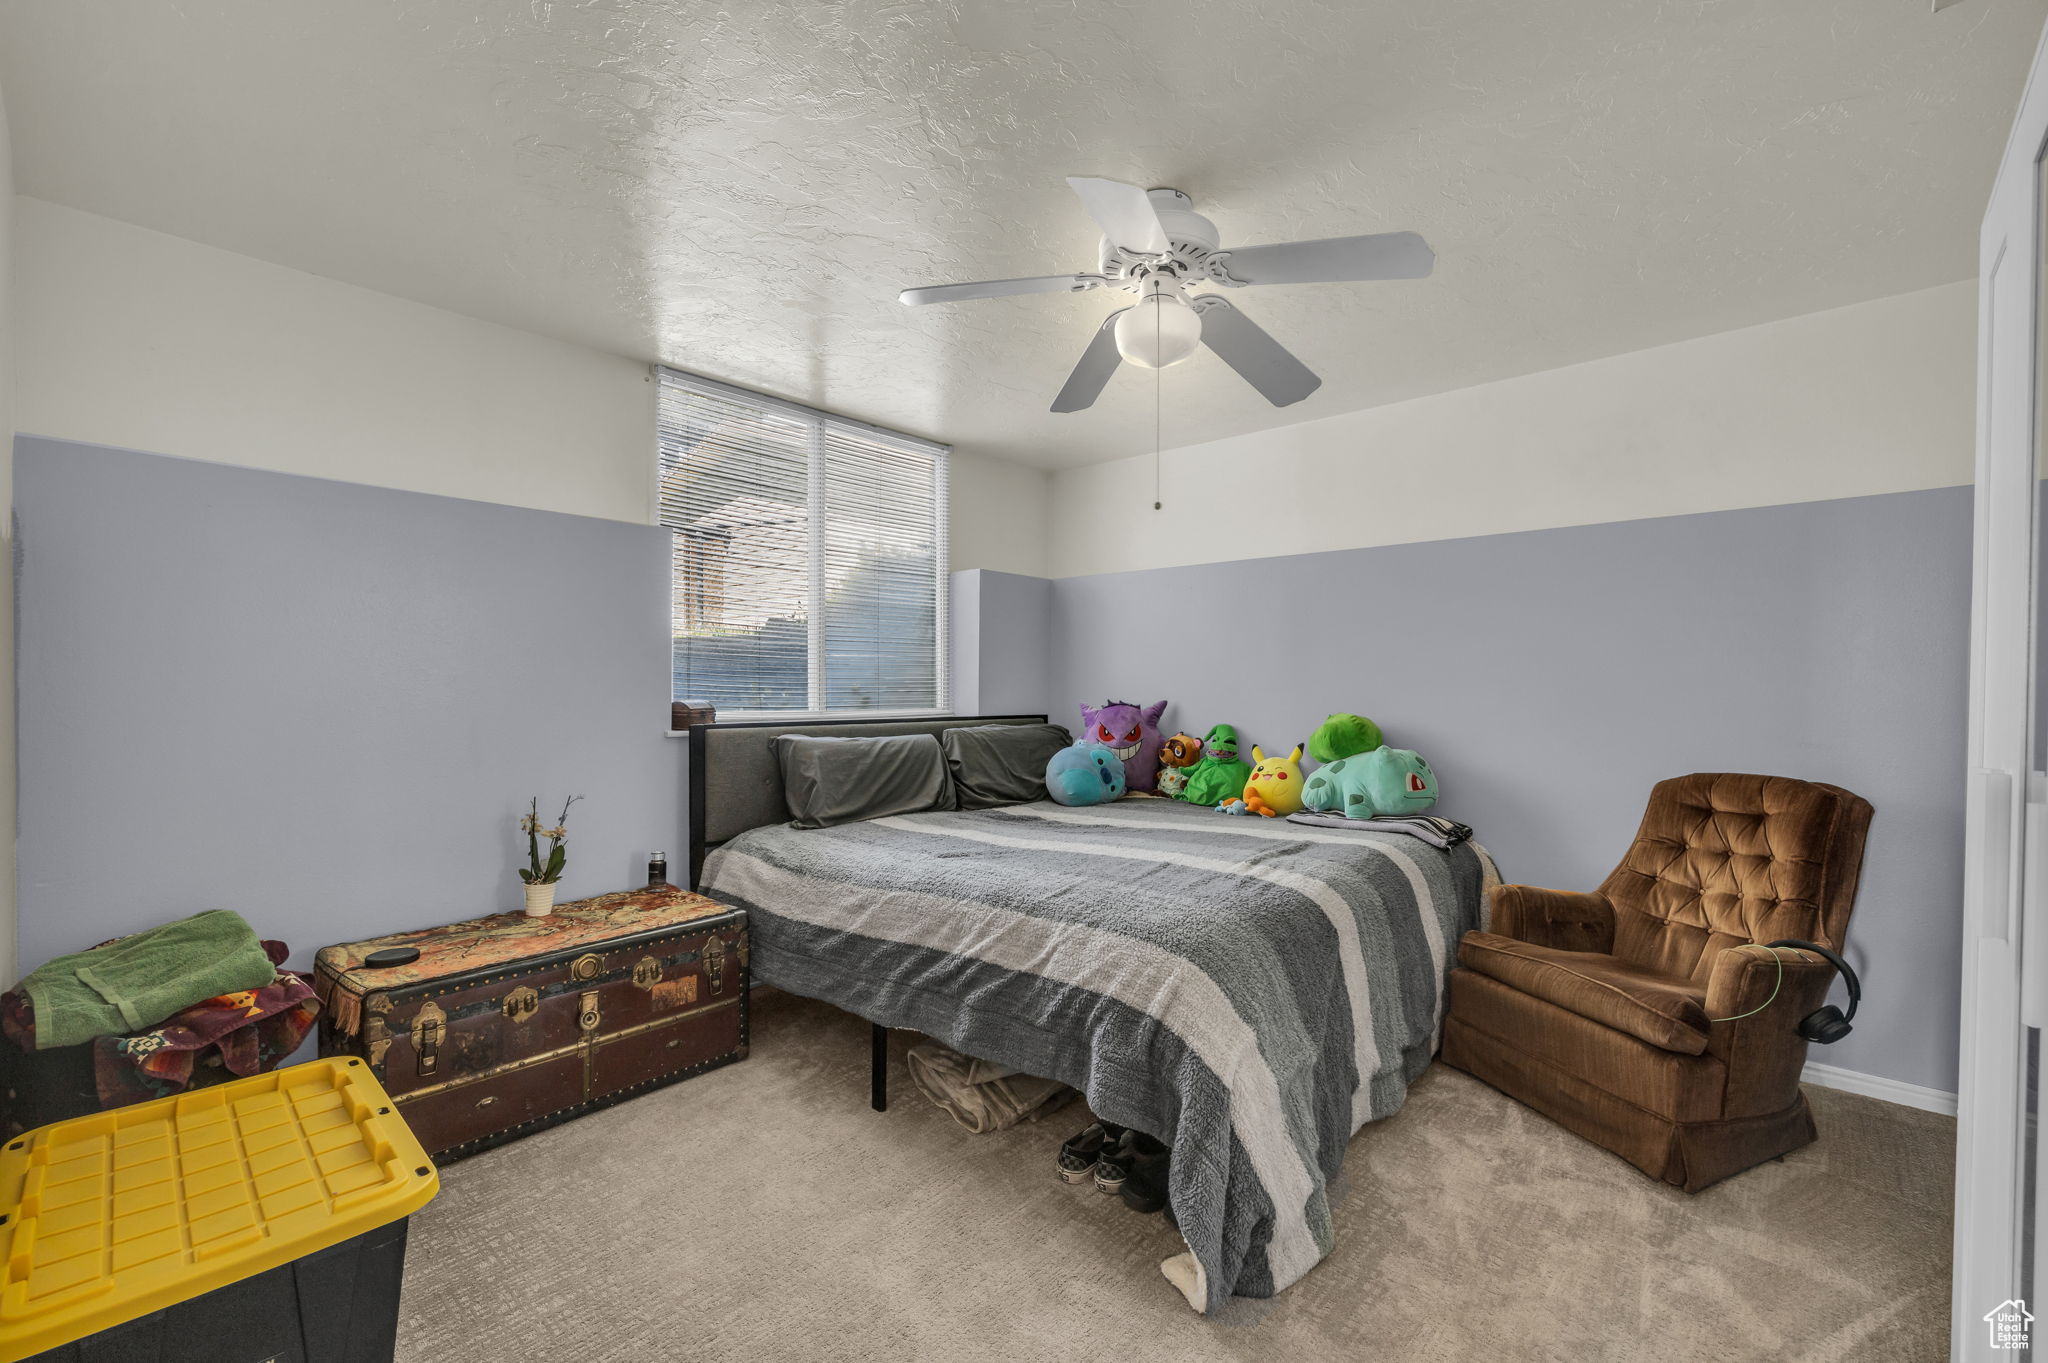 Bedroom with ceiling fan and carpet